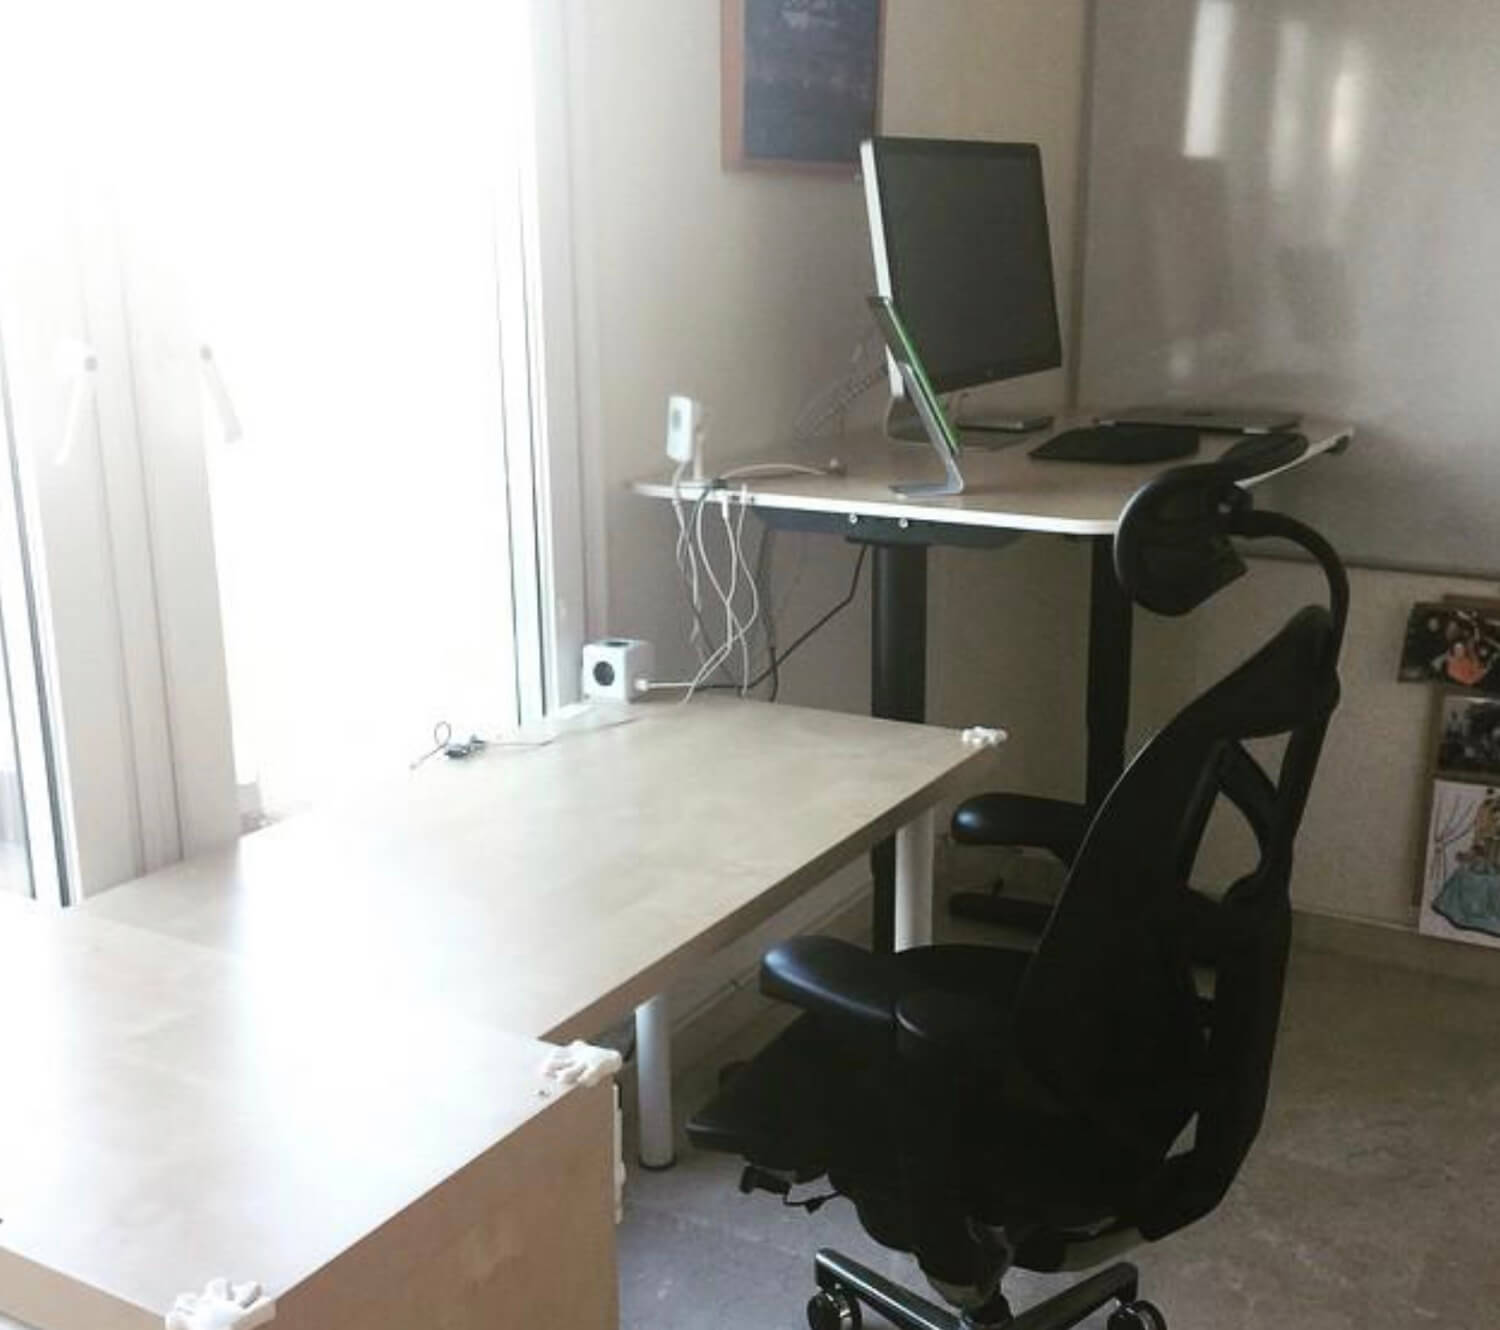 My Home Office 2015 renovation with Ikea’s height-adjustable desk - finished office